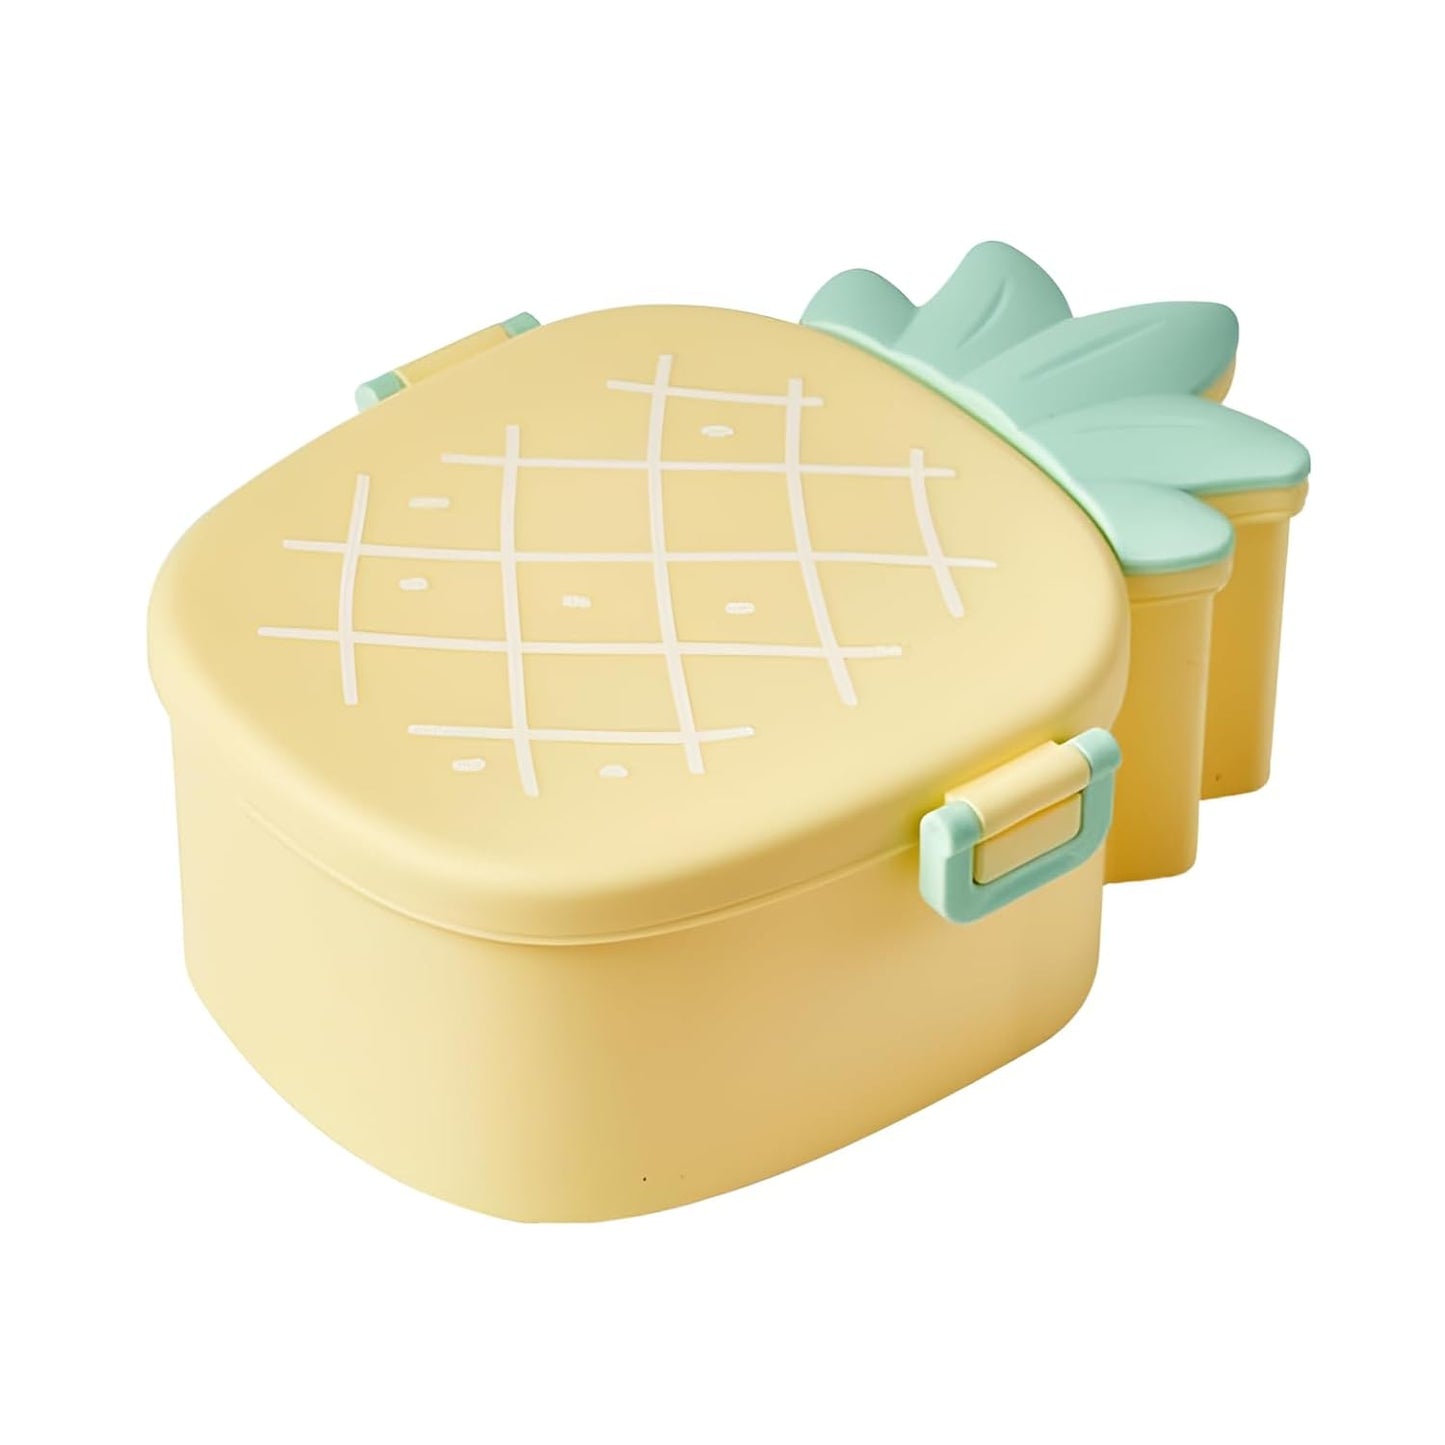 Cute Pineapple Shaped Kids Lunch Box, Fun, Eco-Friendly Bento Container with Microwave-Safe Fork, Spoon and Snack Storage for School or Office